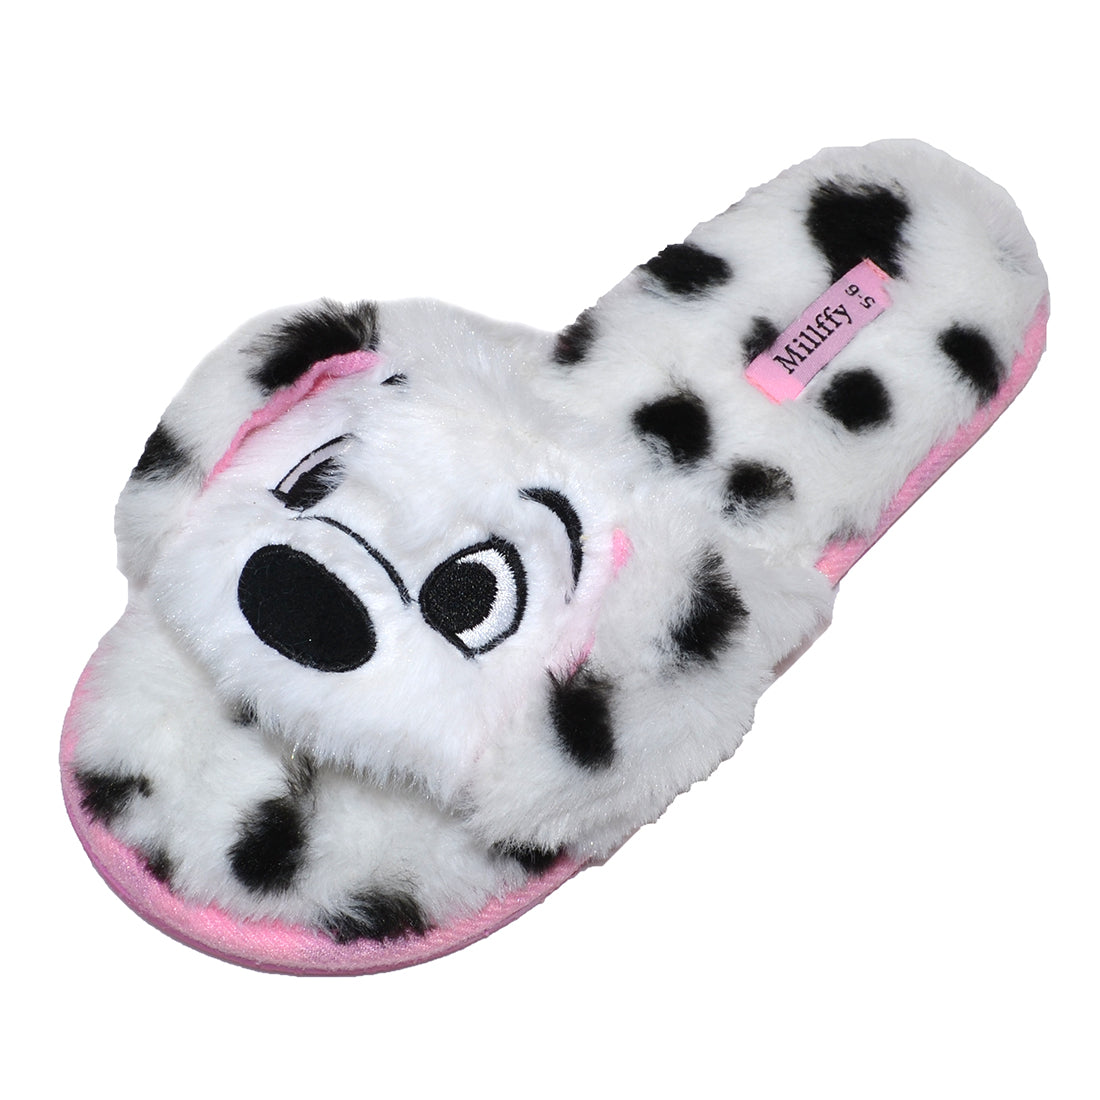 Millffy fuzzy fluffy open toe slippers for Women cat puppy Thong Slides flip flop slippers